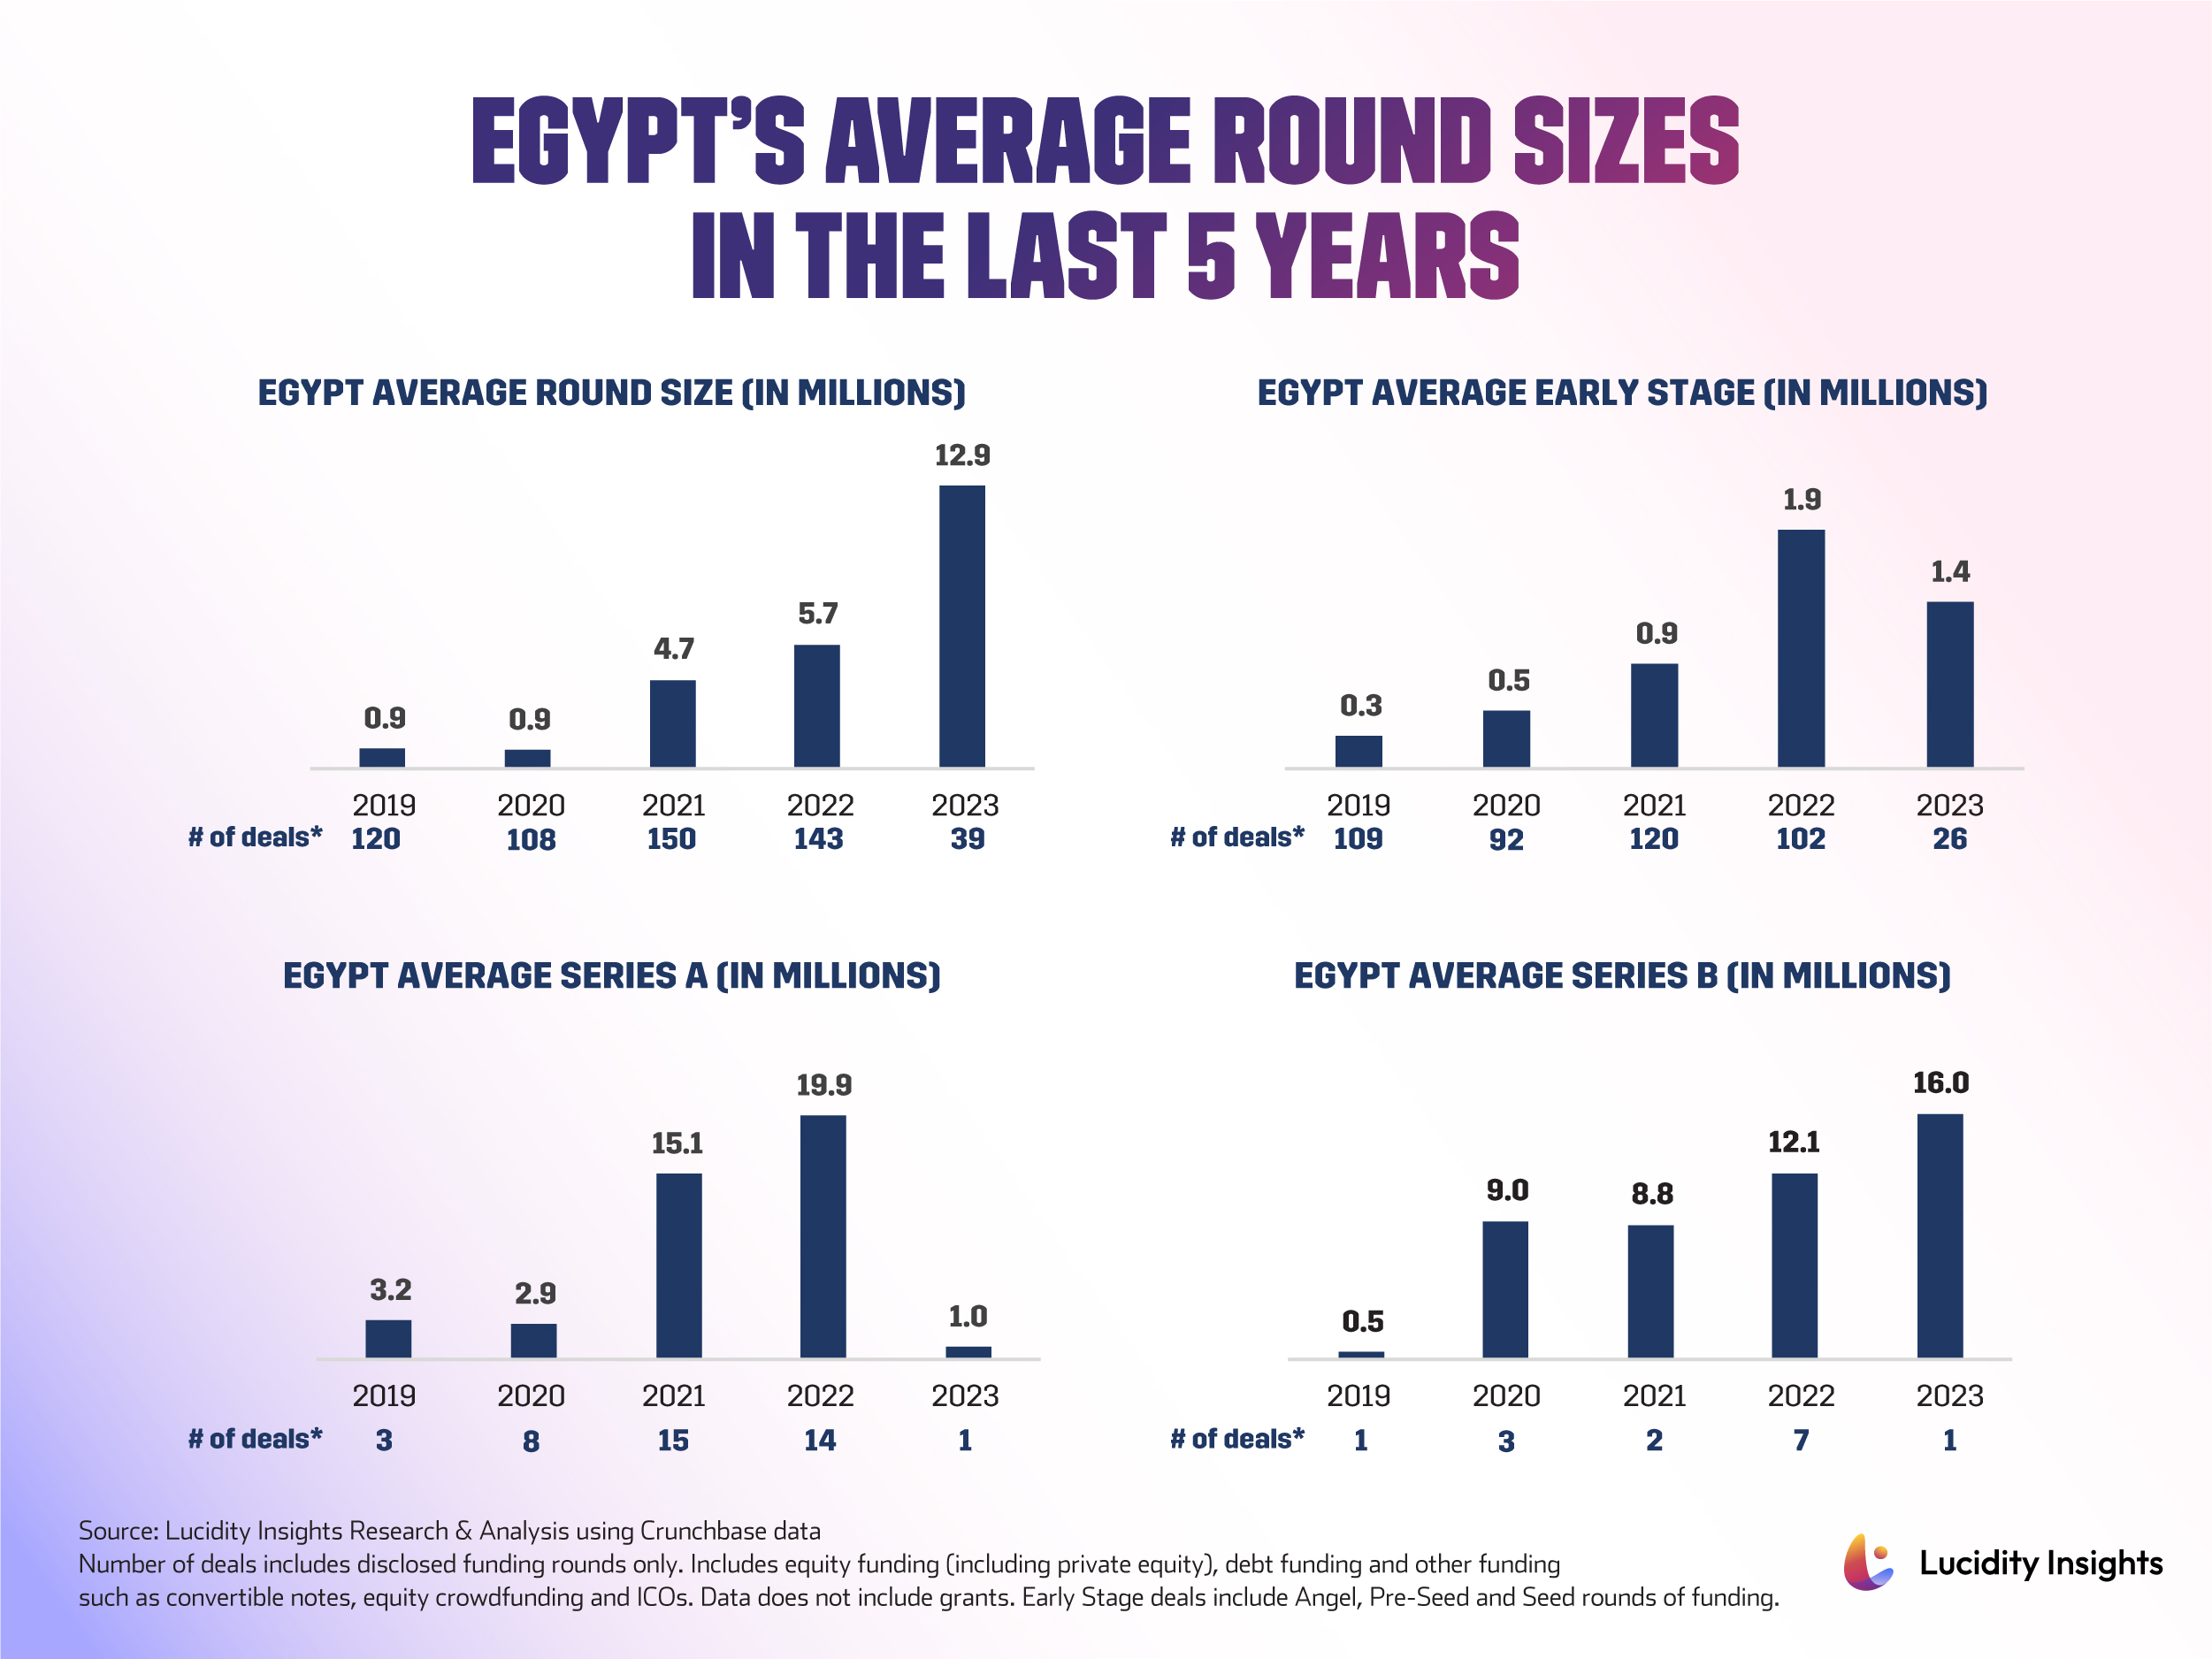 Egypt’s Average Round Sizes in the Last 5 Years